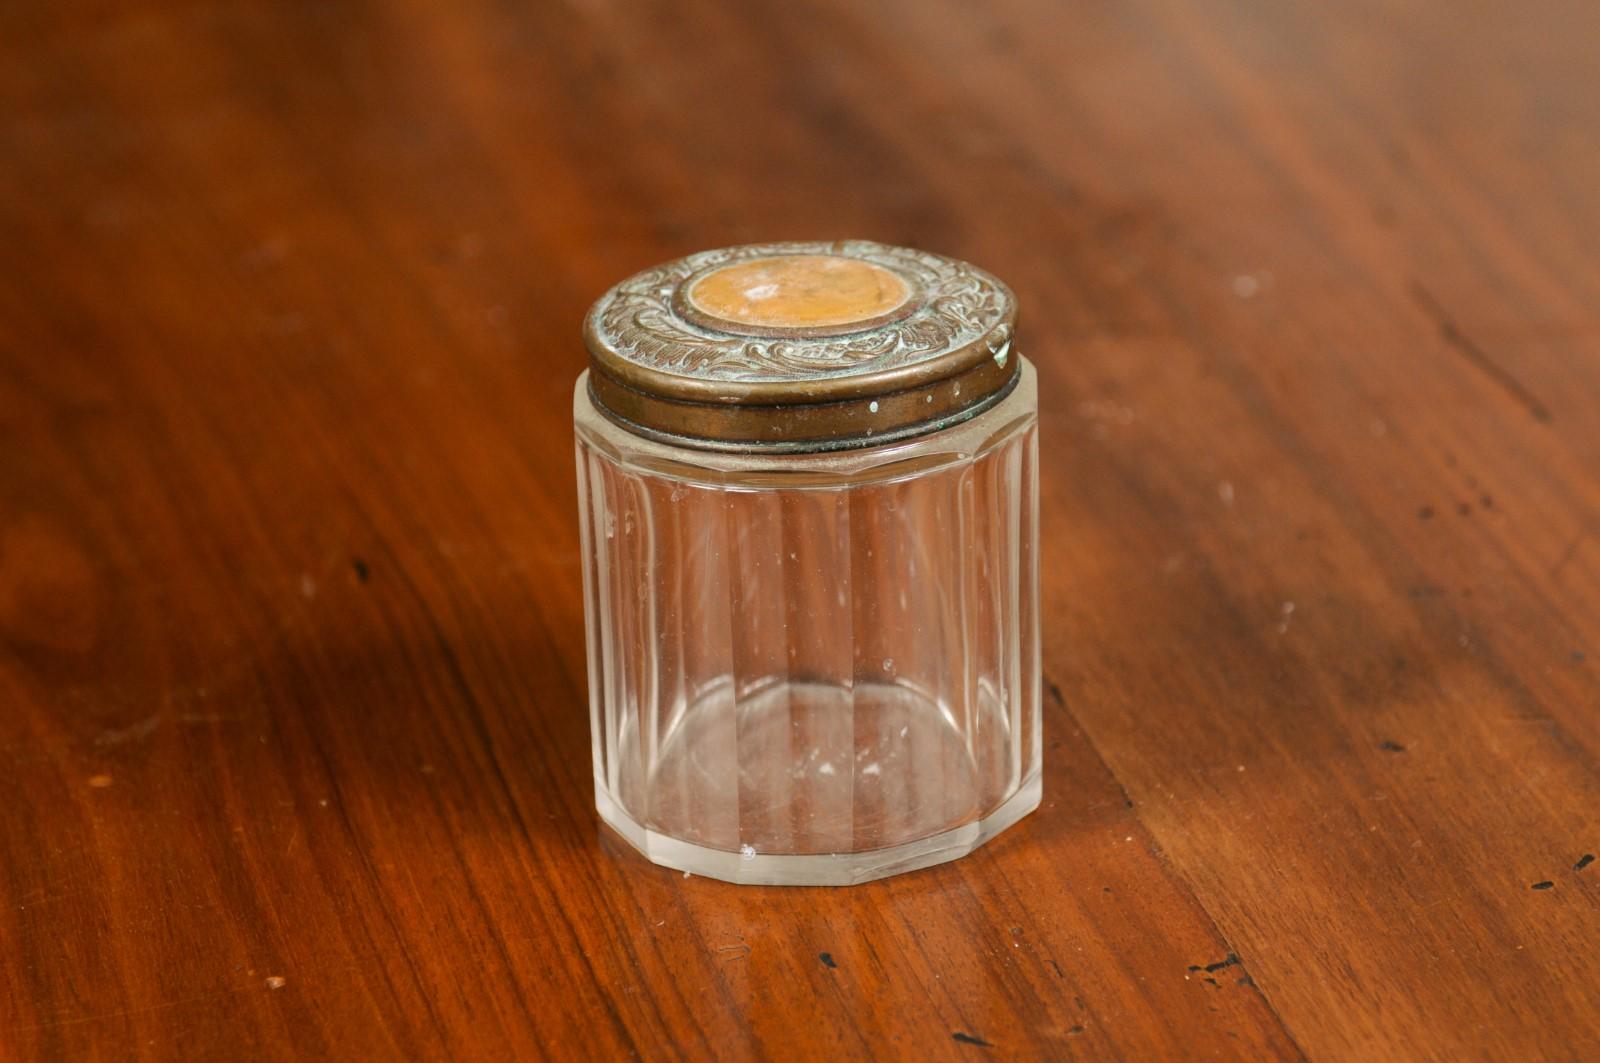 A small English Victorian period glass vanity jar from the 19th century, with metal lid and faceted design. Created in England during the 19th century, this jar container features a circular glass body adorned with faceted patterns. Topped with a